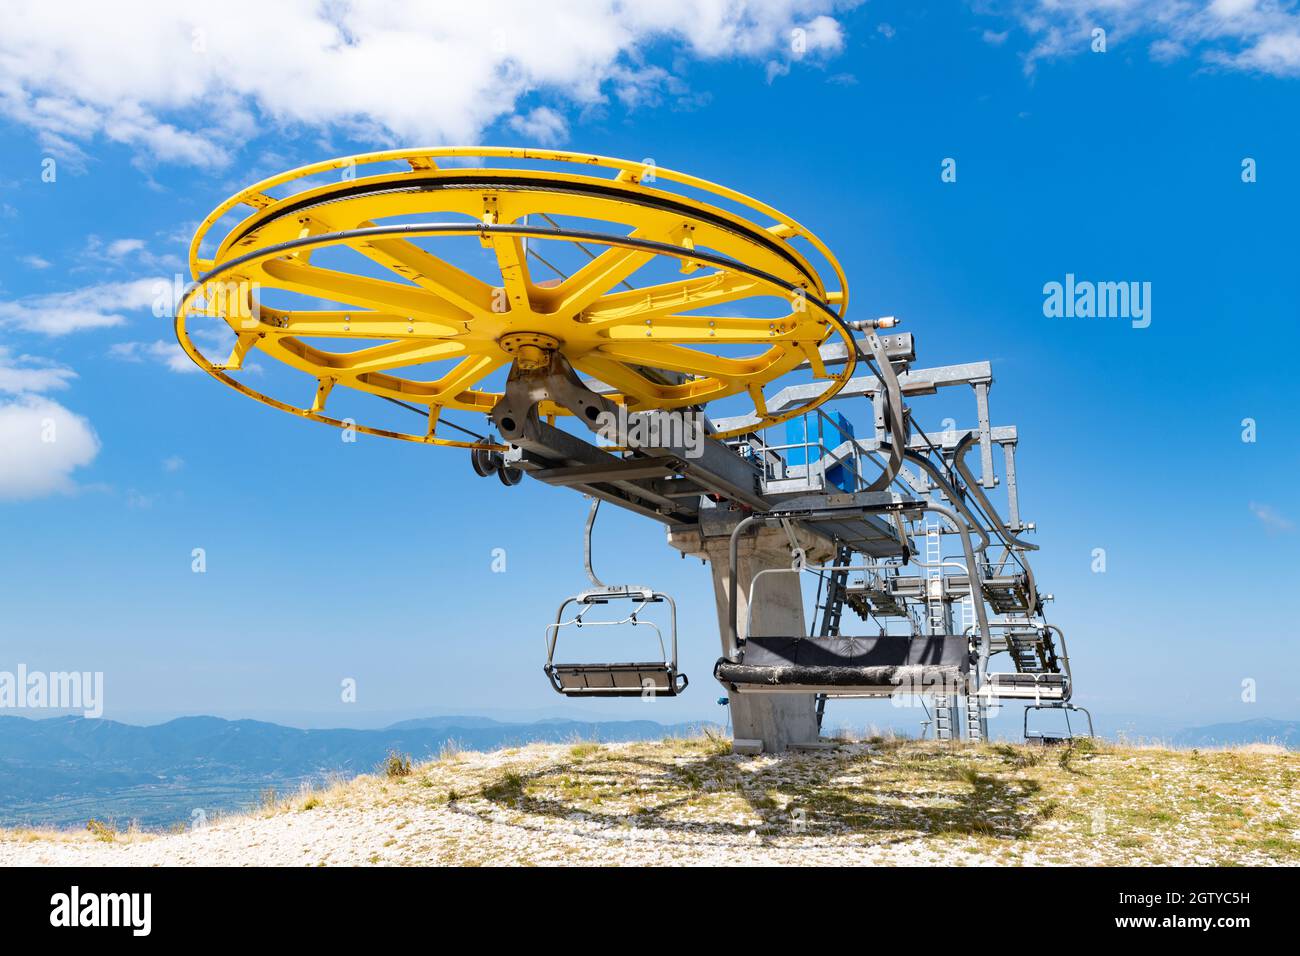 Low Angle View Of Ski Lift On Field Against Blue Sky Stock Photo